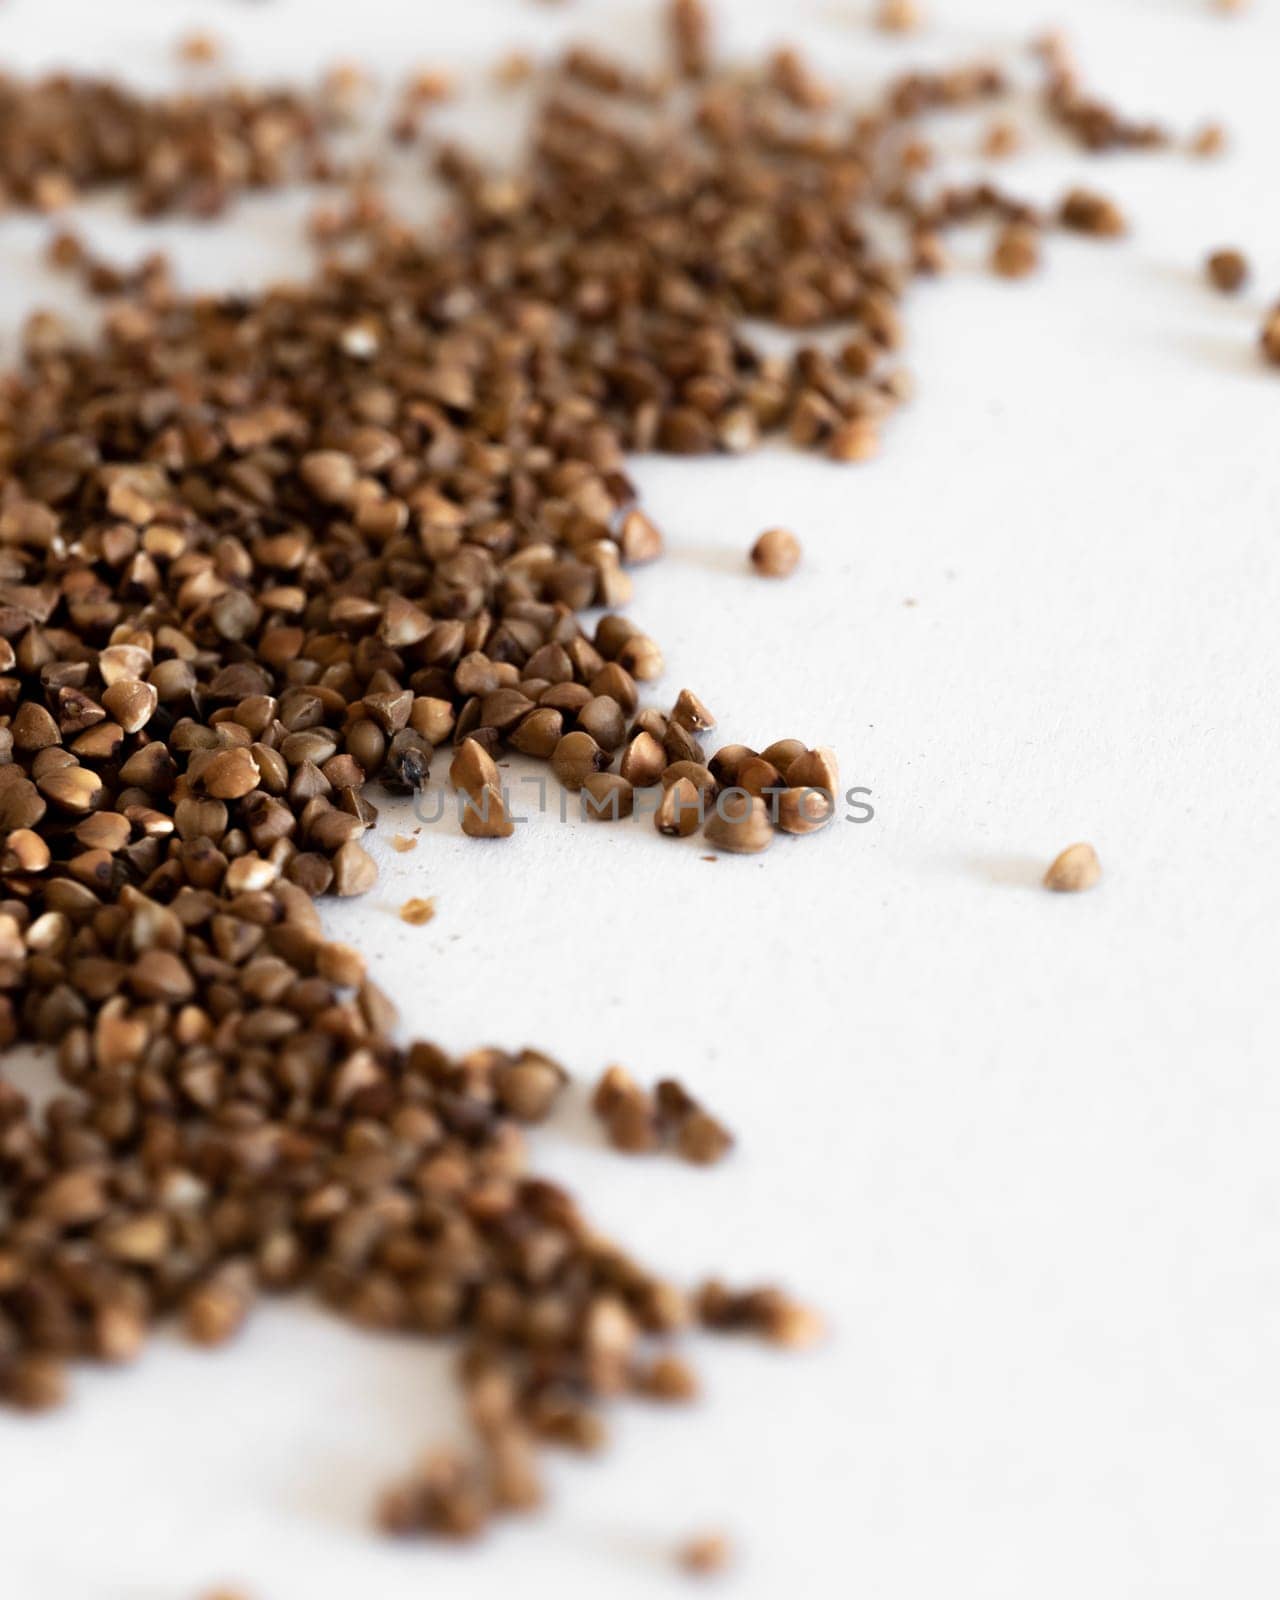 A Pile Of Brown Grains of buckwheat On A White Surface by apavlin